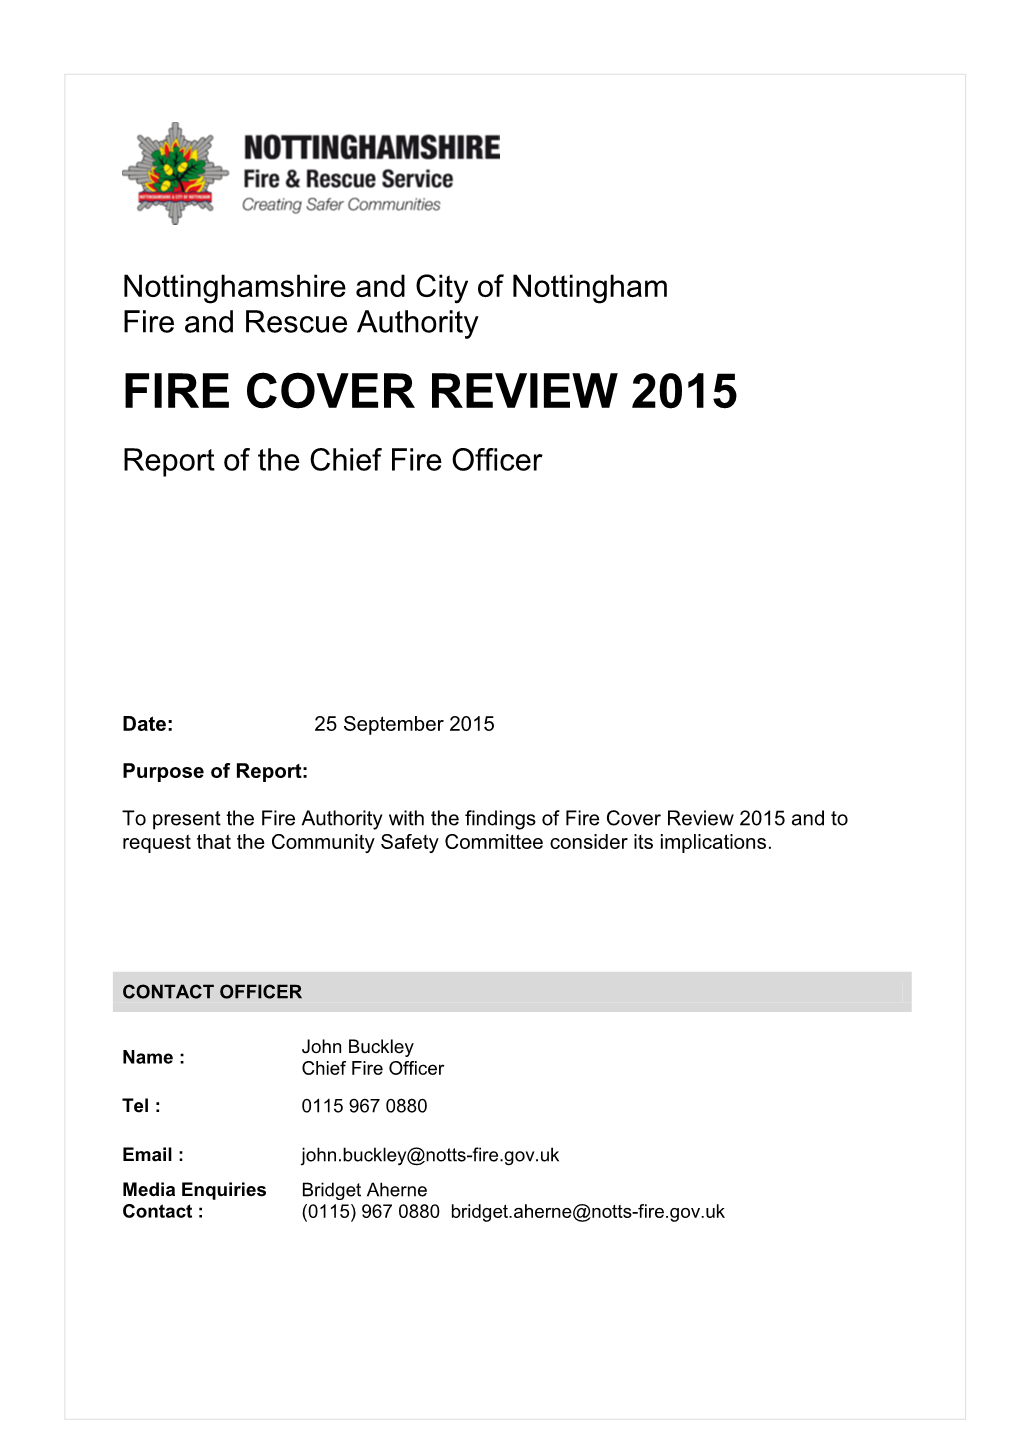 Fire Cover Review 2015